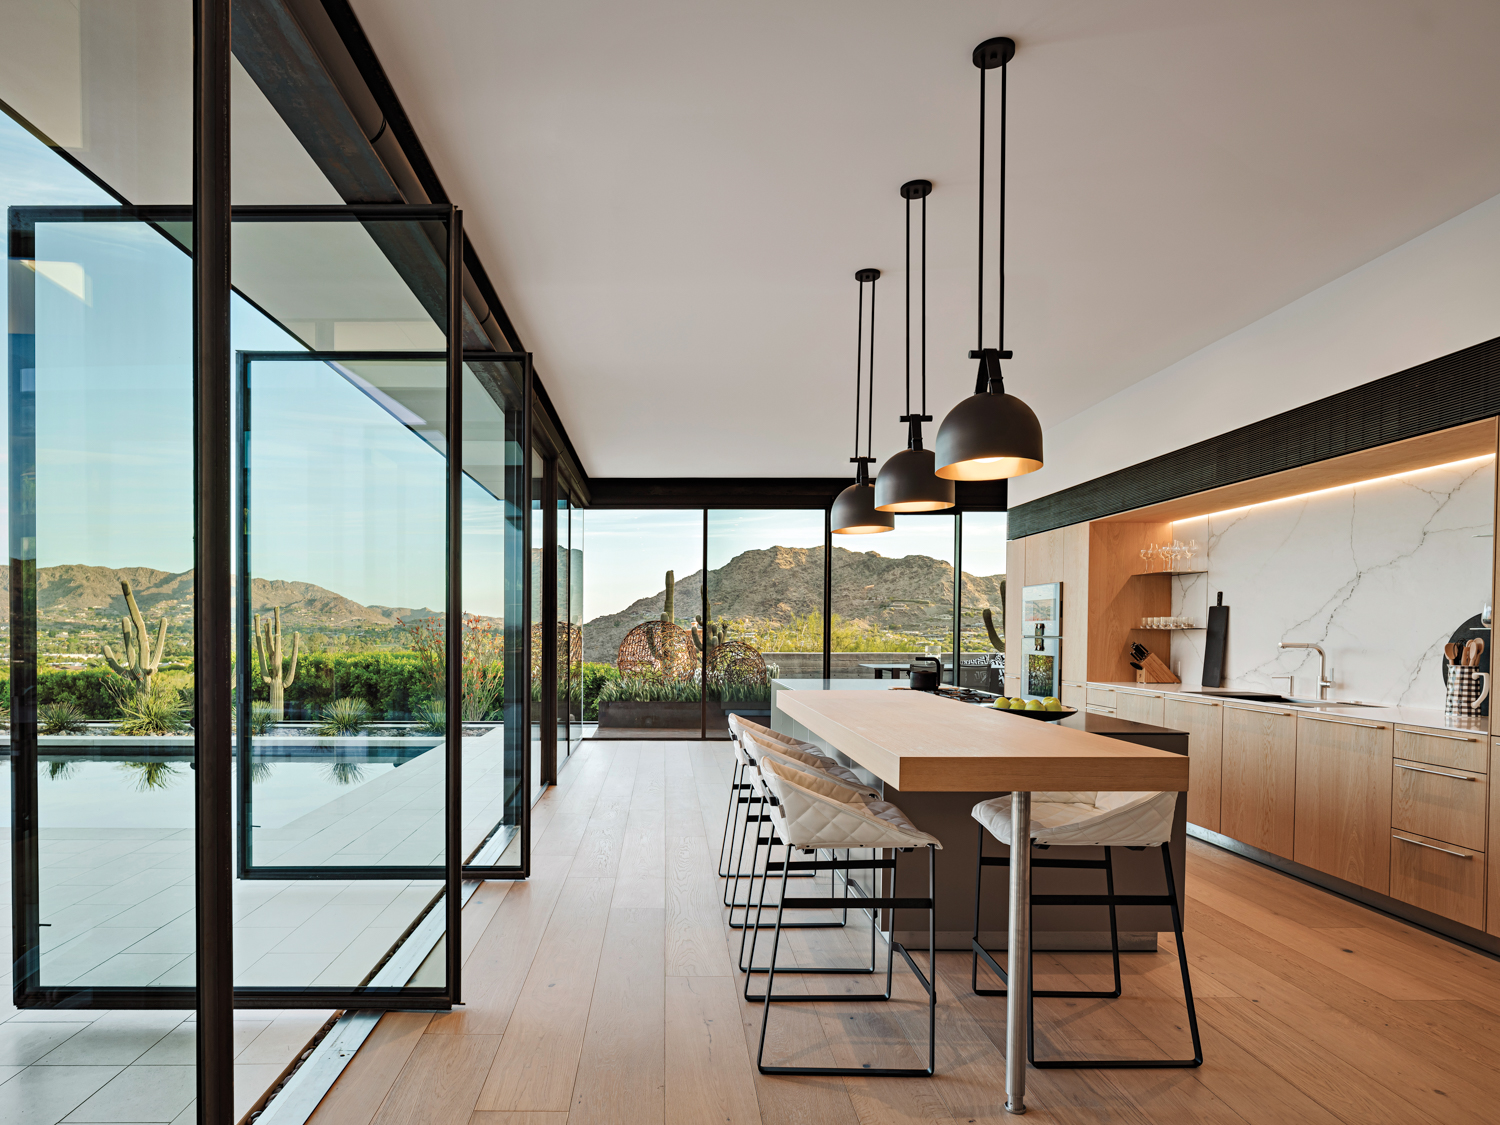 A modern kitchen with pivoting...